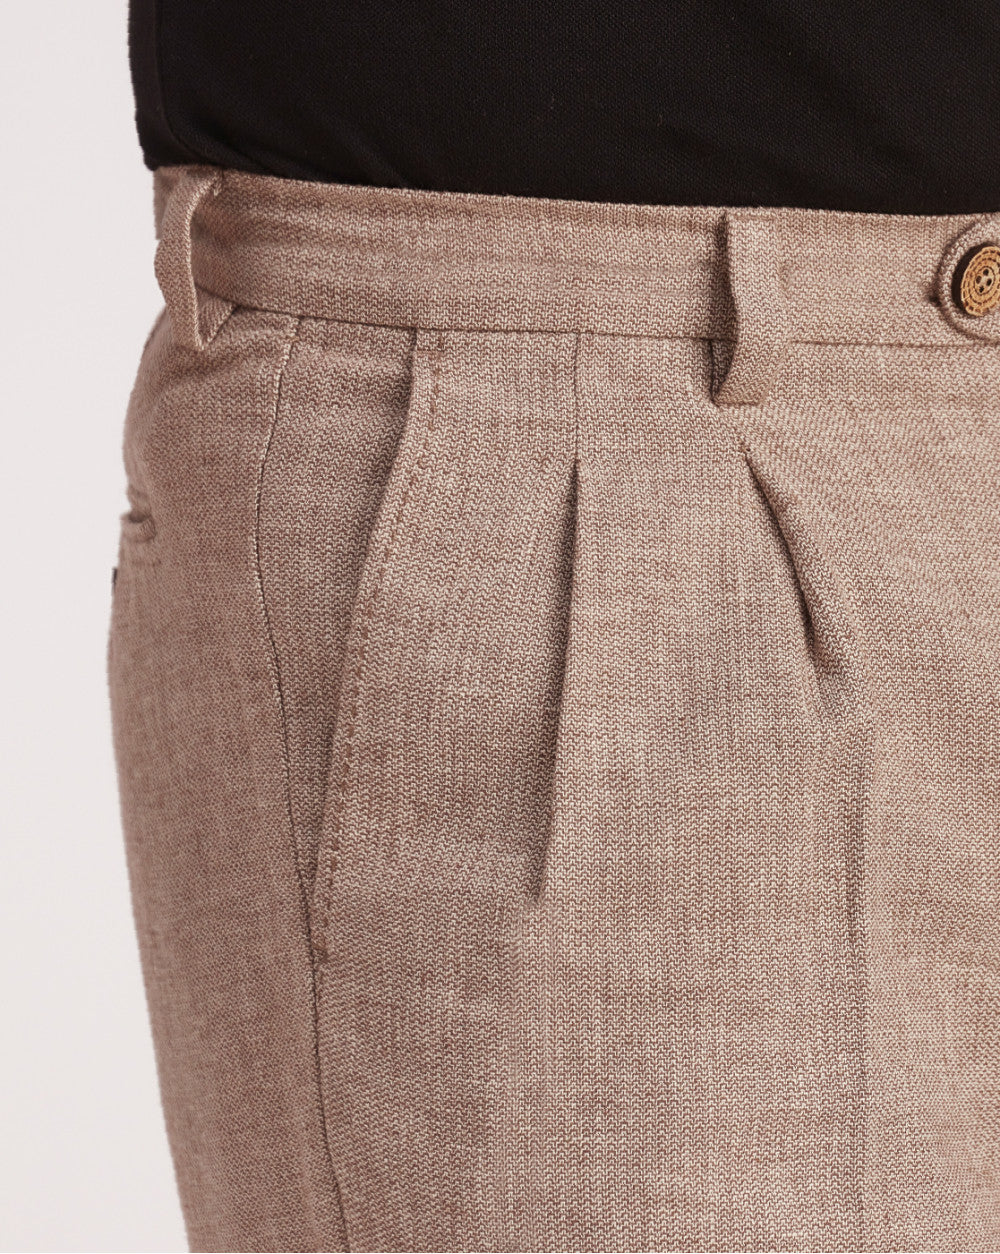 Double Pleated Relaxed Fit Trousers - Brown Oak